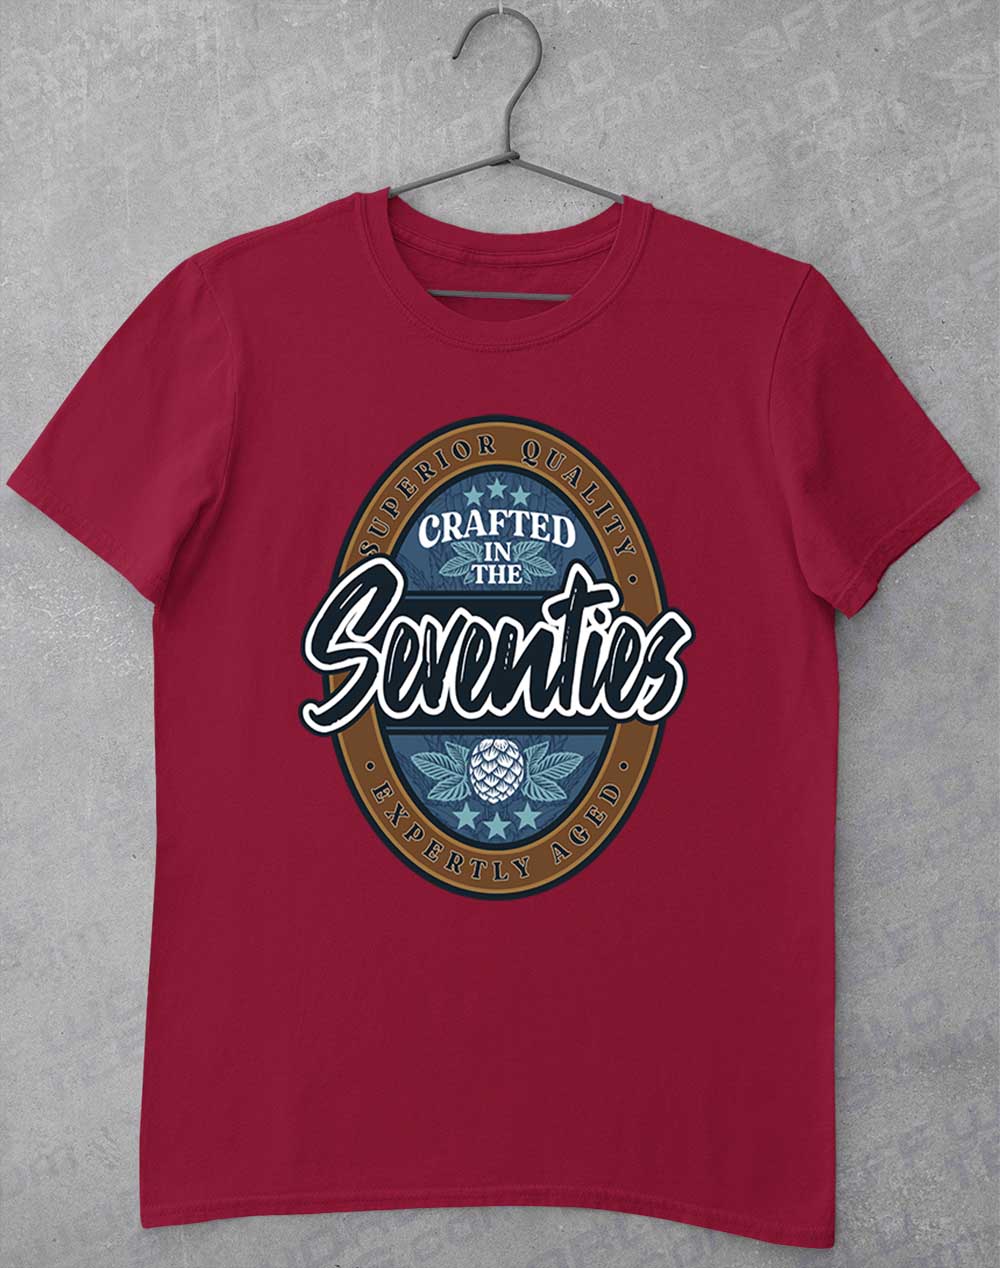 Crafted in the Seventies T-Shirt